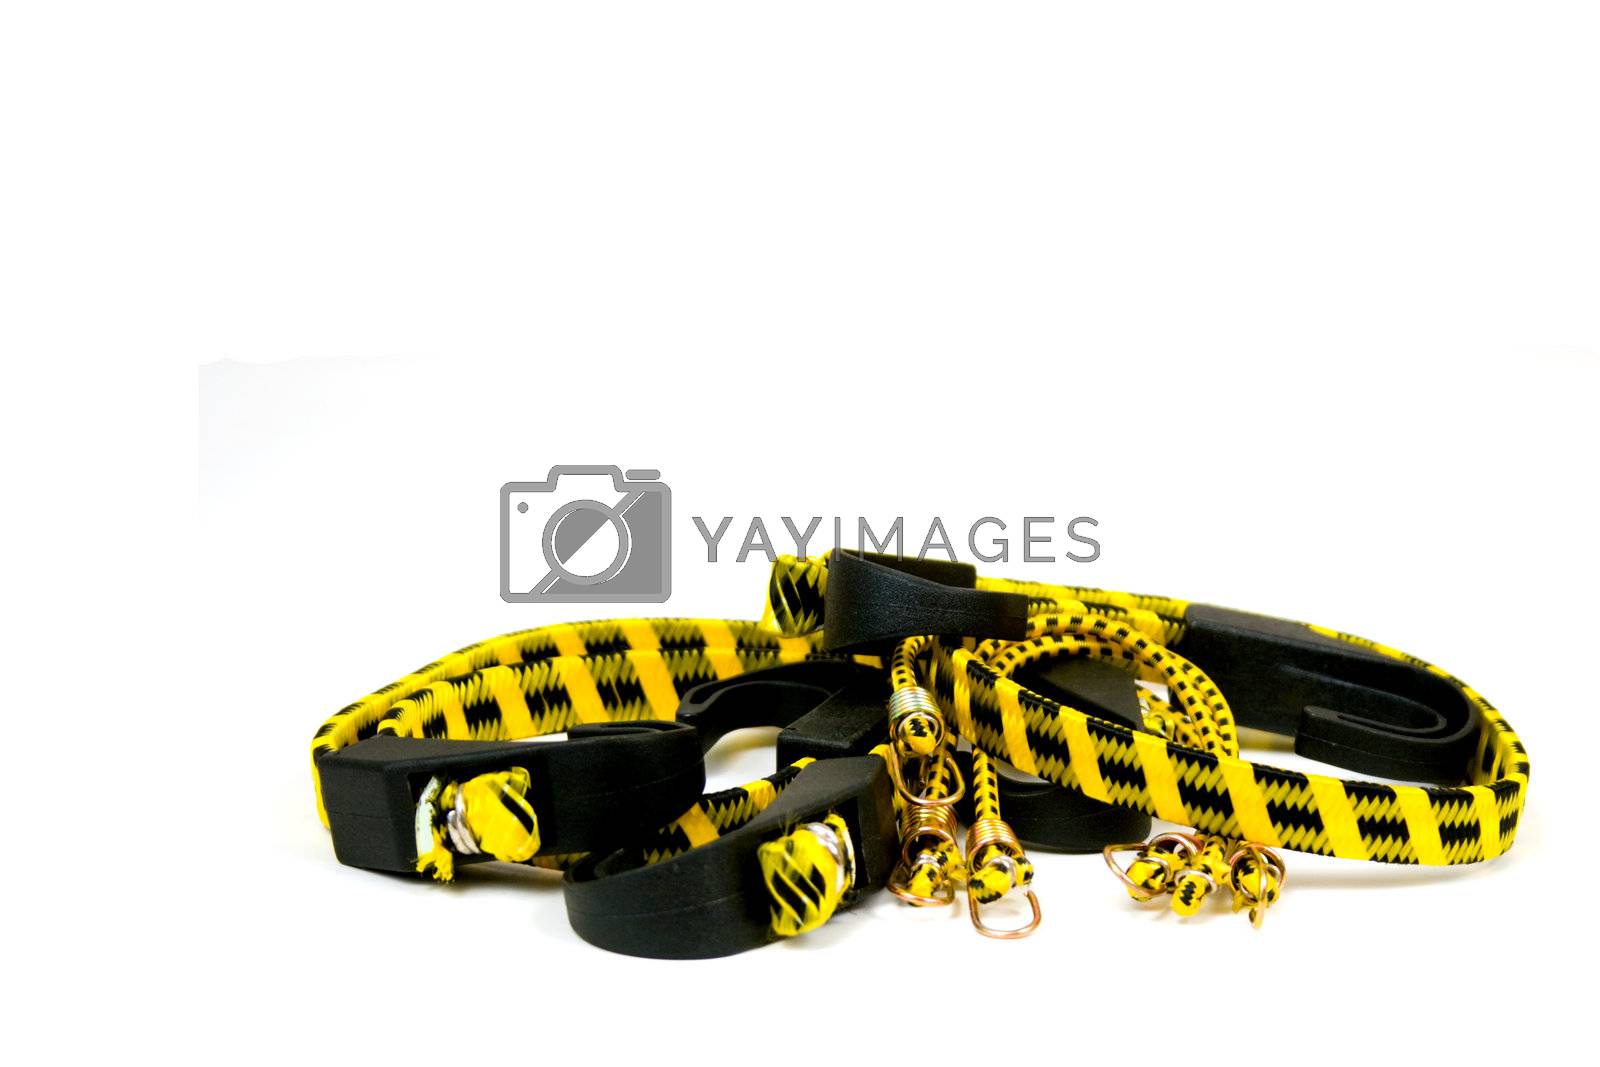 Royalty free image of Isolated Bungee Cords by mwp1969